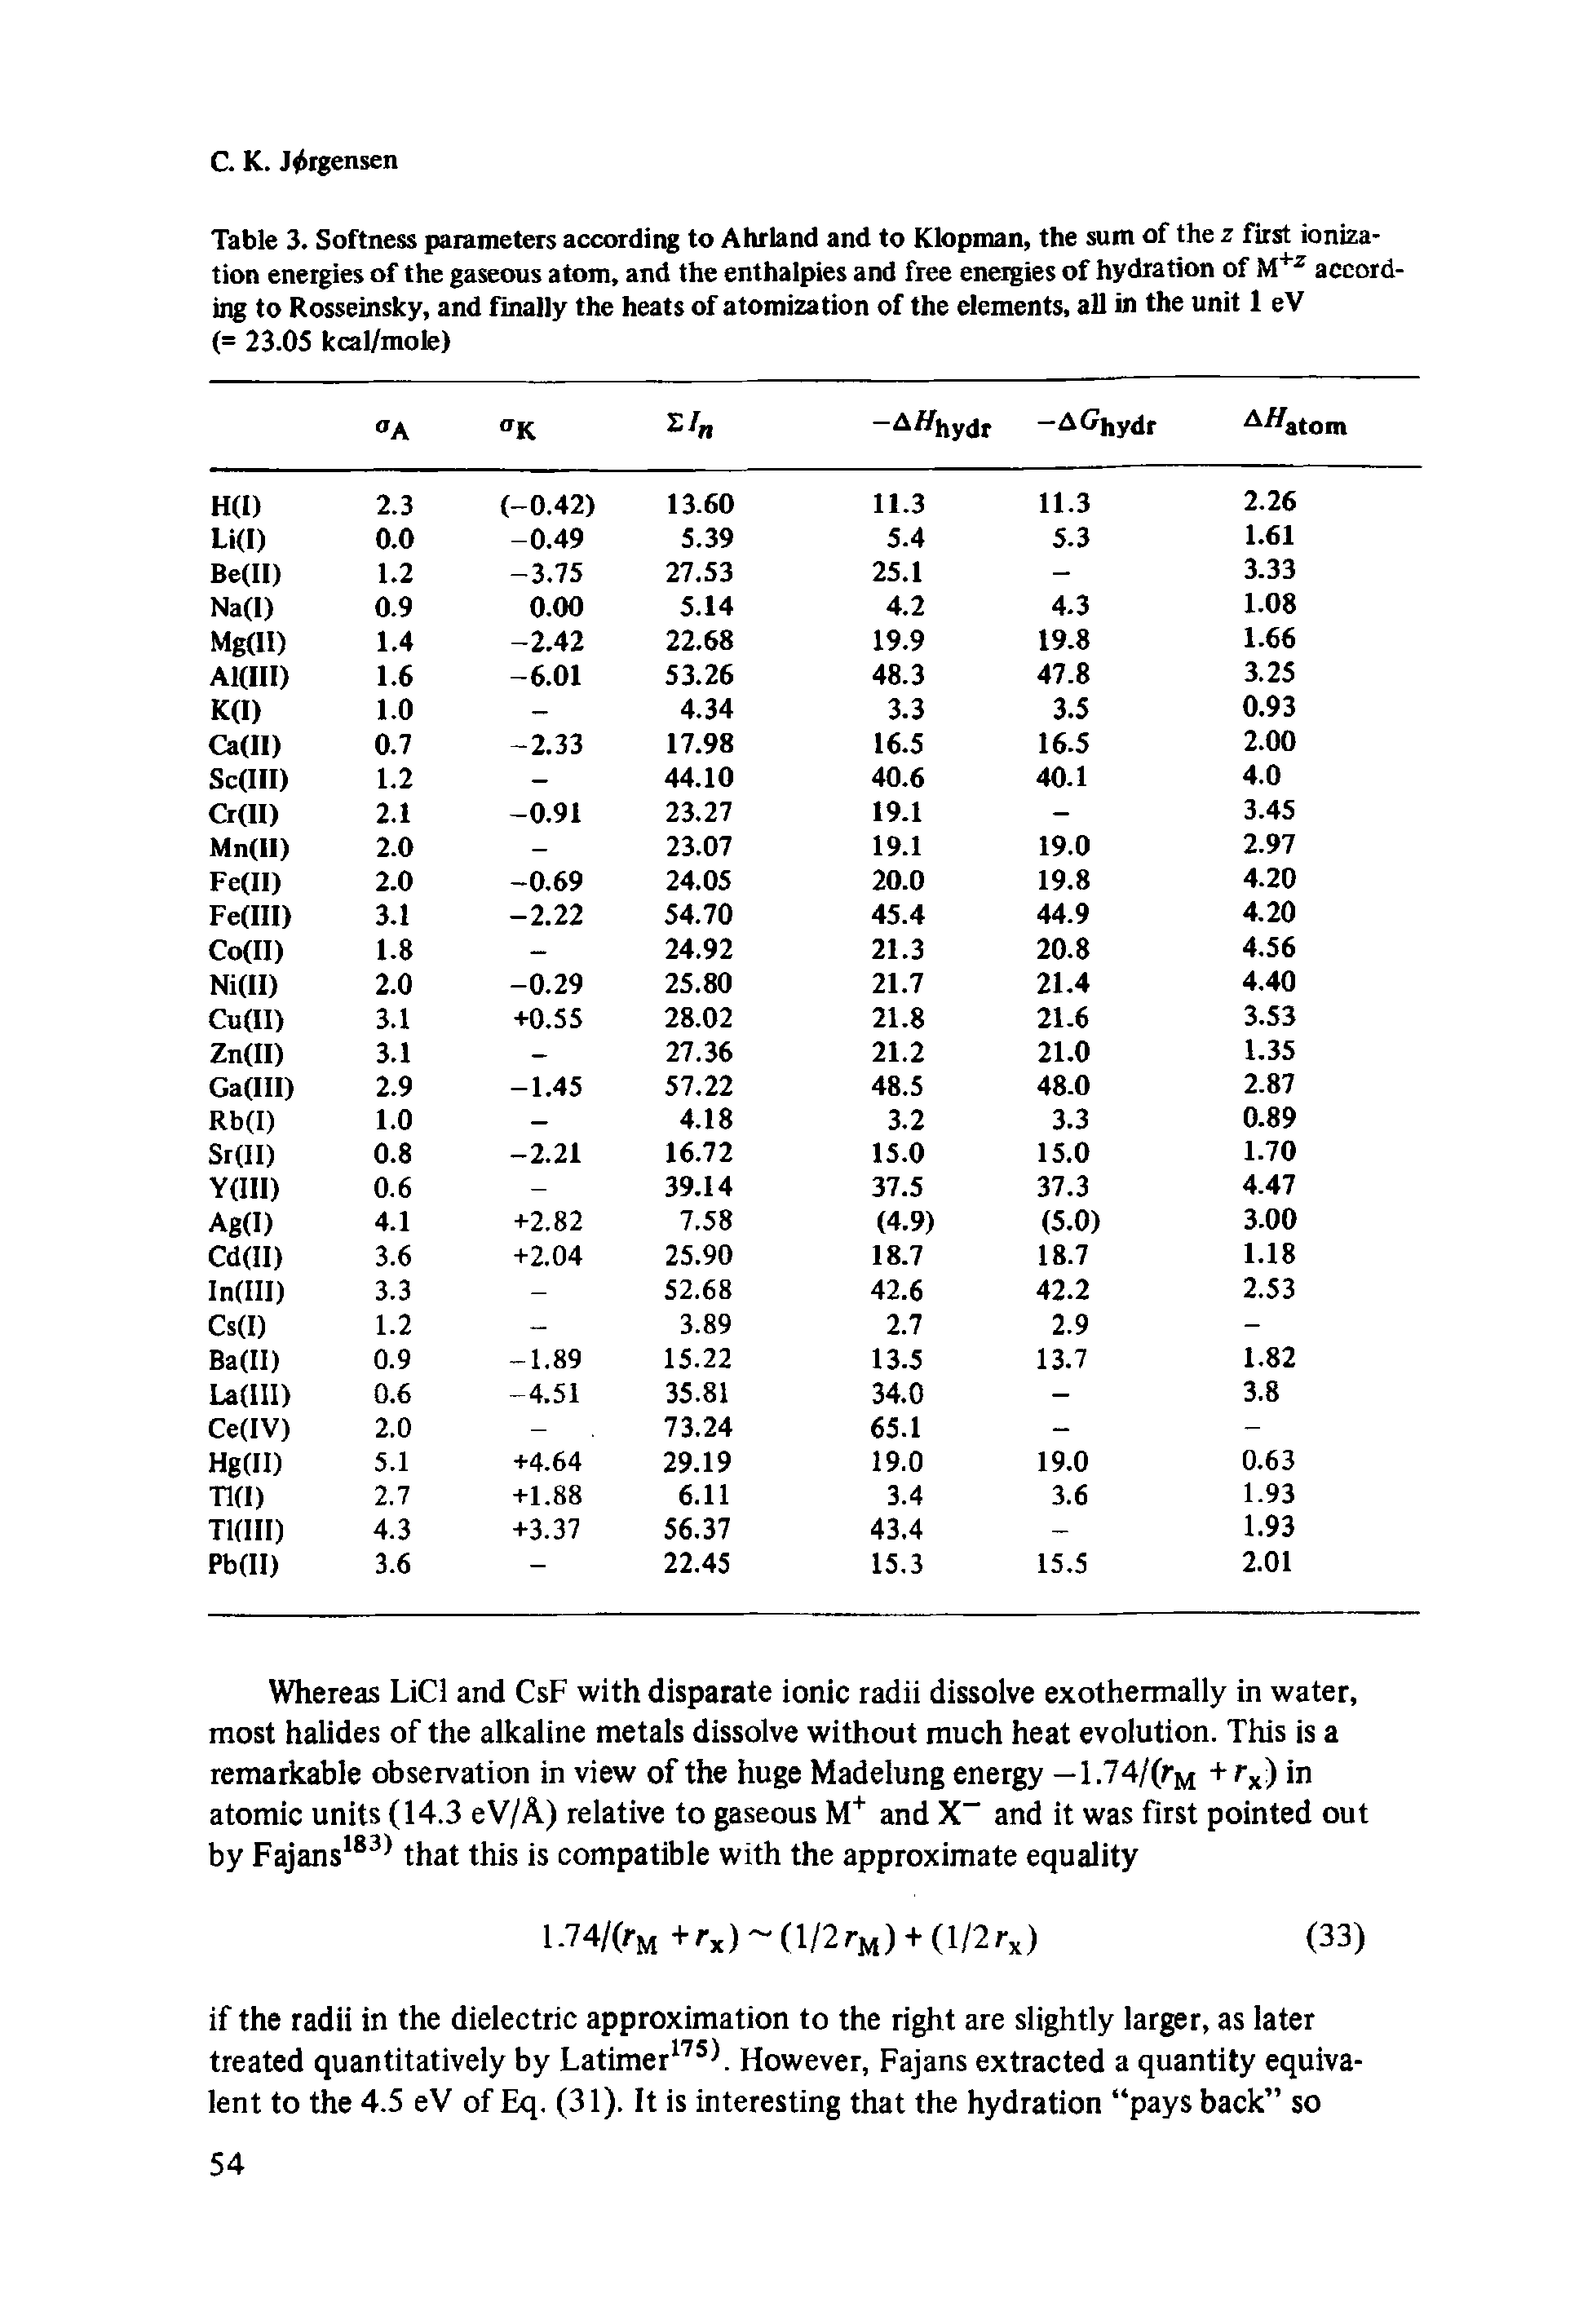 Table 3. Softness parameters according to Ahrland and to Klopman, the sum of the z first ionization energies of the gaseous atom, and the enthalpies and free energies of hydration of M+z according to Rosseinsky, and finally the heats of atomization of the elements, all in the unit 1 eV (= 23.05 kcal/mole)...